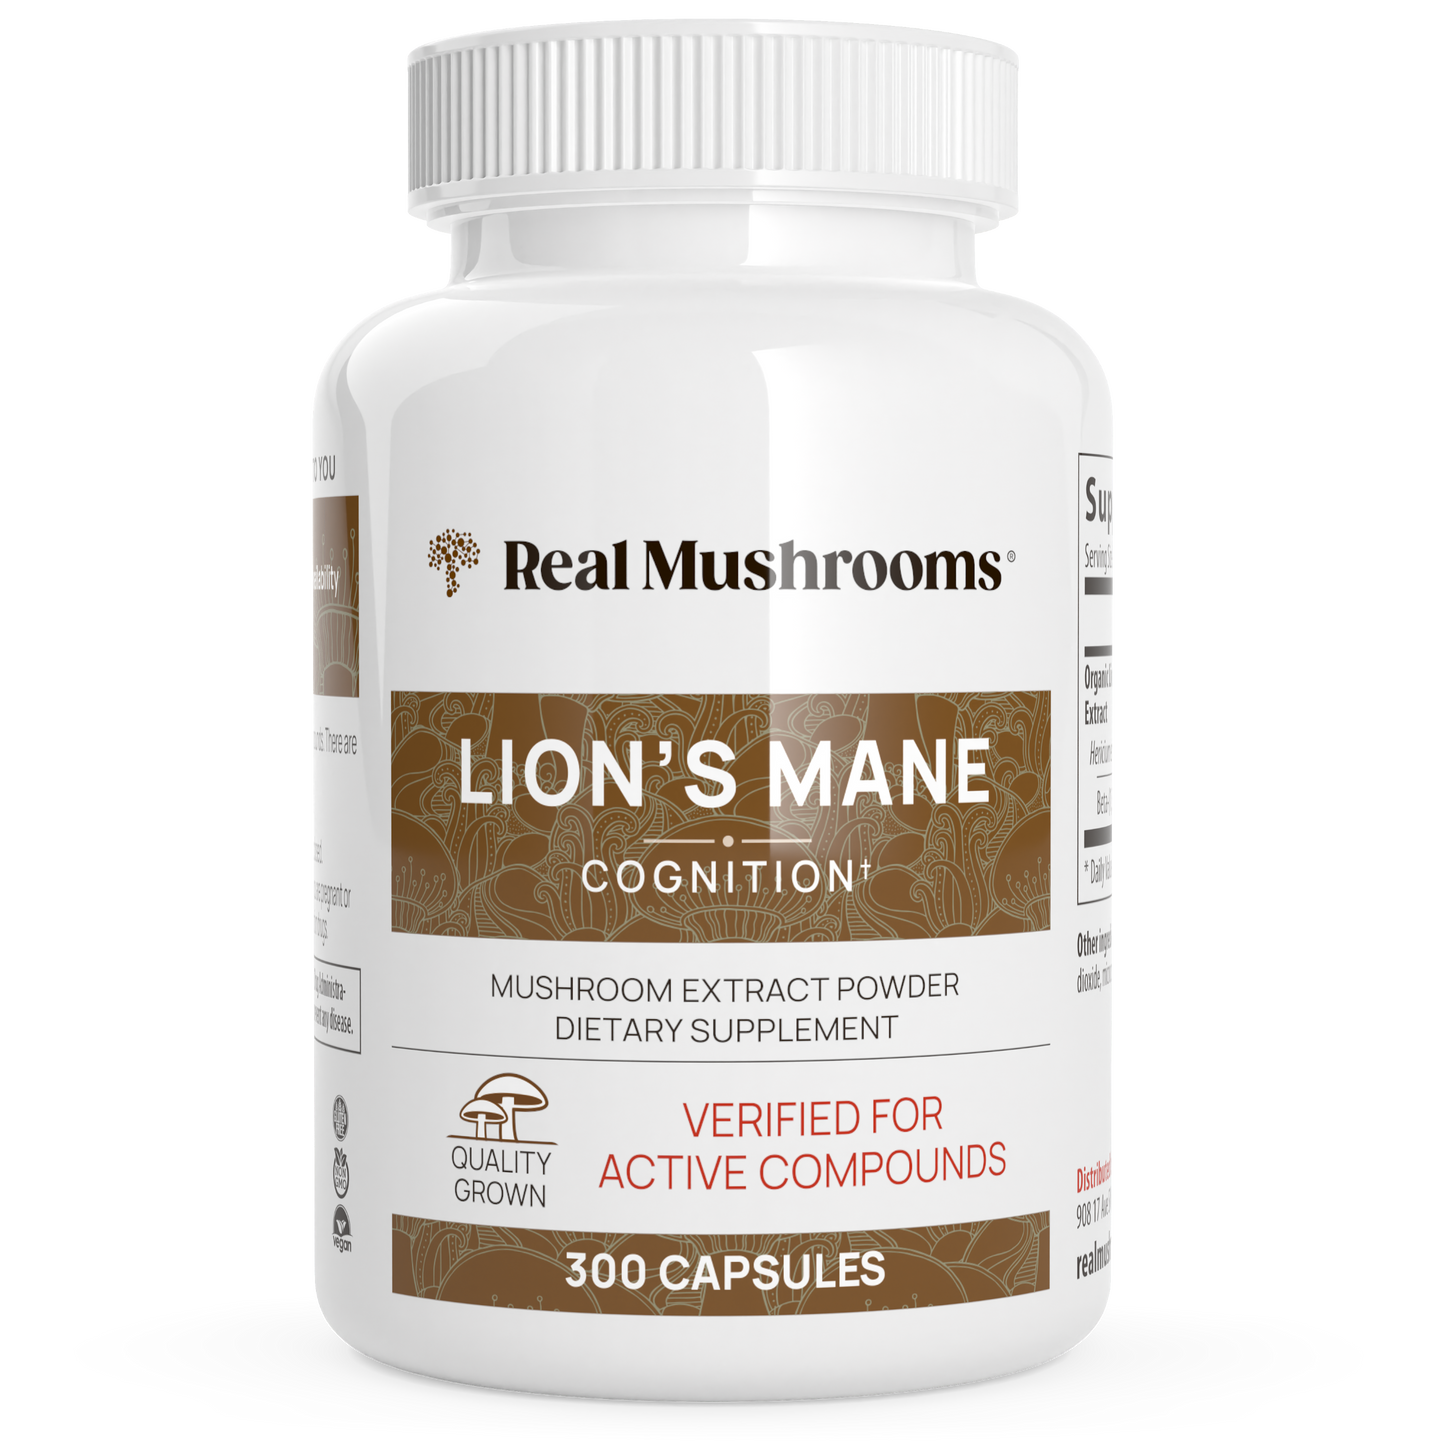 Real Mushrooms Lion's Mane Cognition: Organic Lions Mane Extract Capsules by Real Mushrooms.